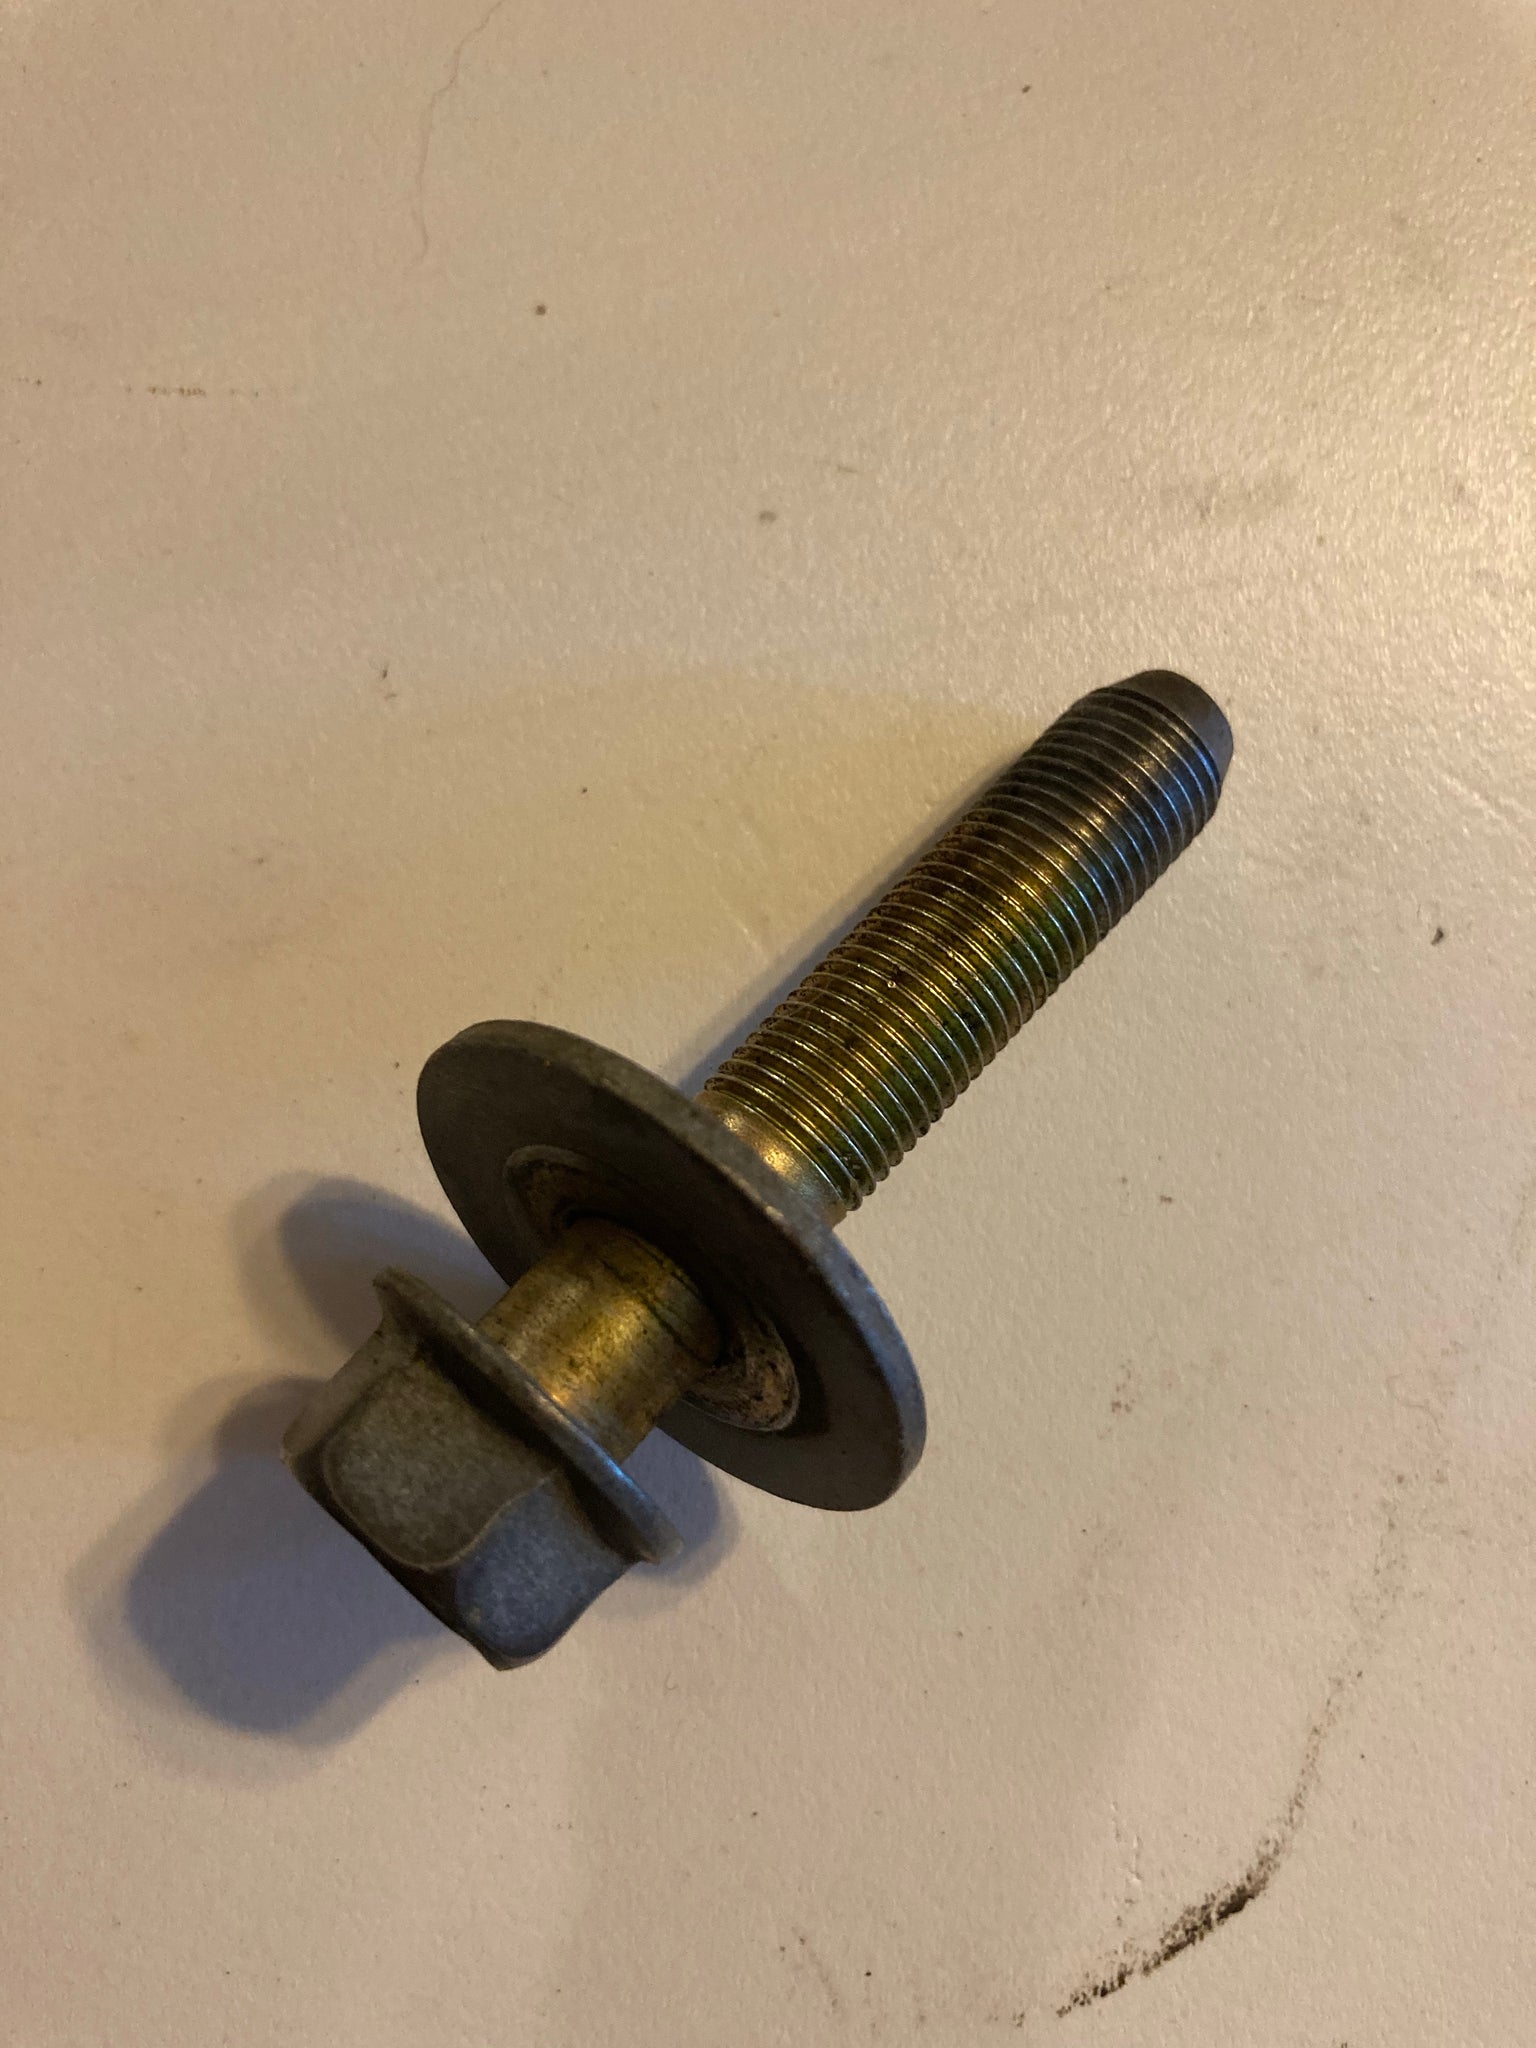 1999-2005 Mazda Miata Steering Rack Bolt at the gearbox